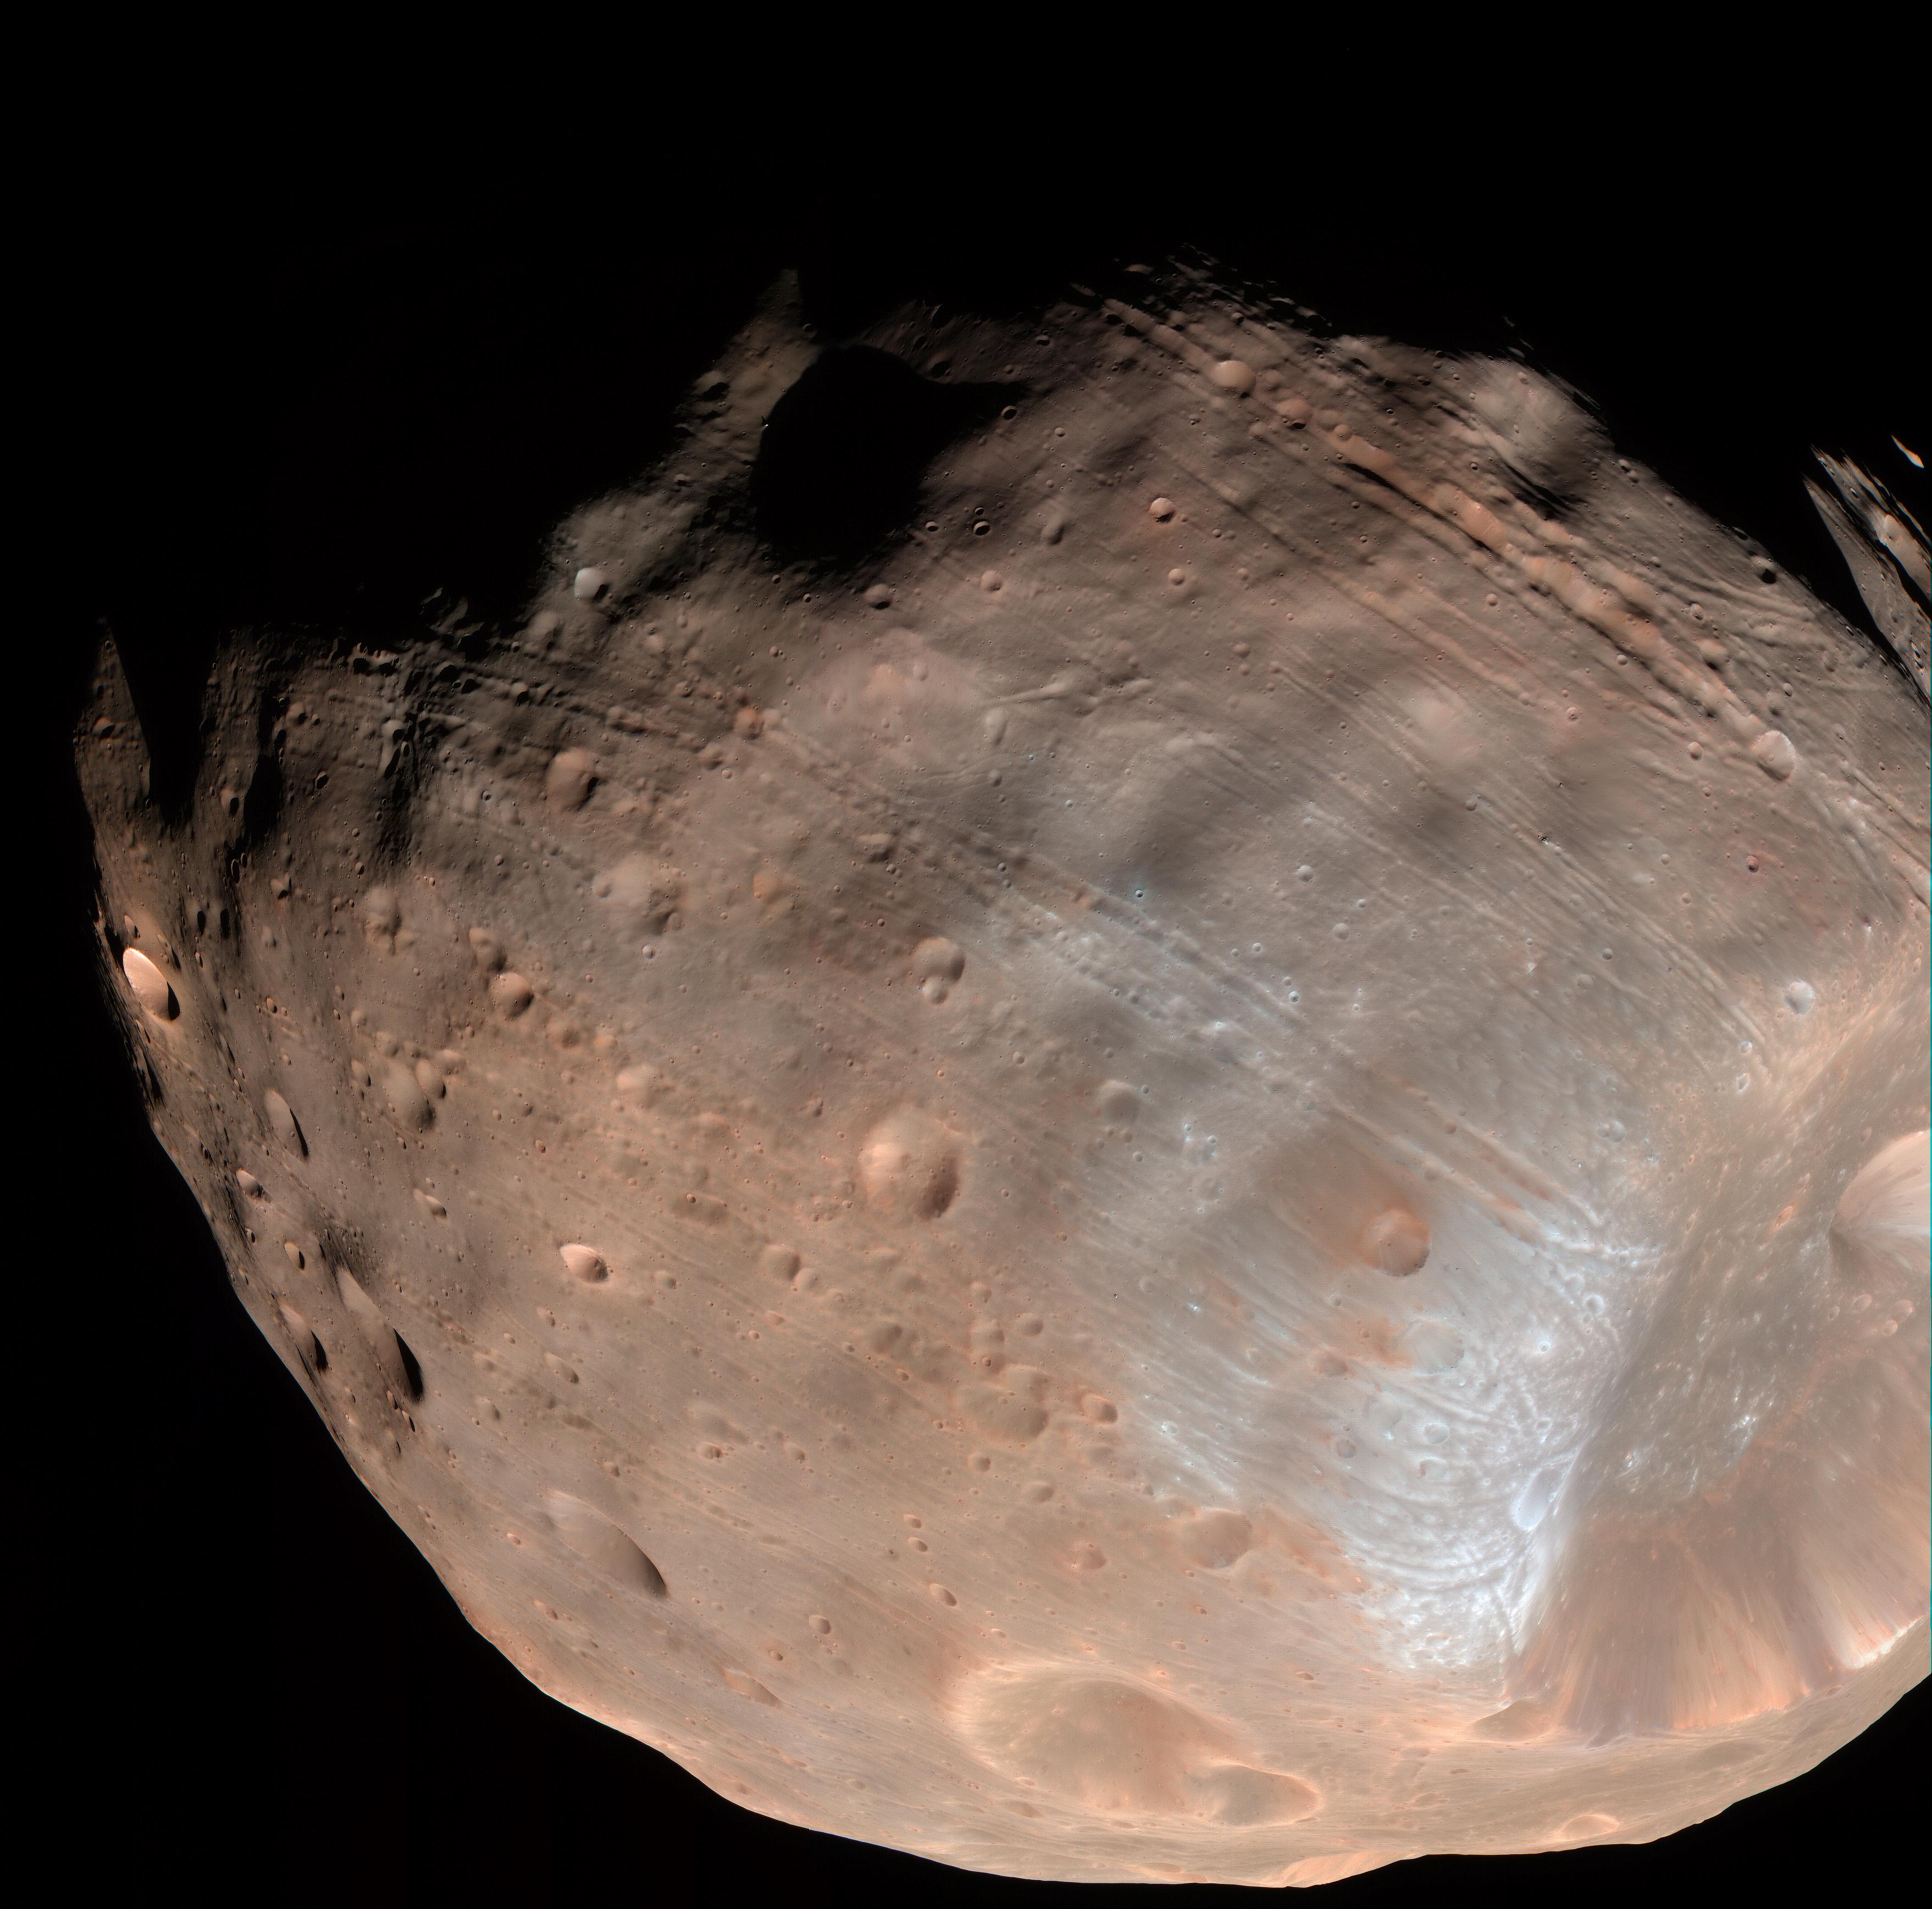 Another good view of both the grooves and the heavily cratered surface of Phobos. Image Credit: NASA/JPL-Caltech/University of Arizona